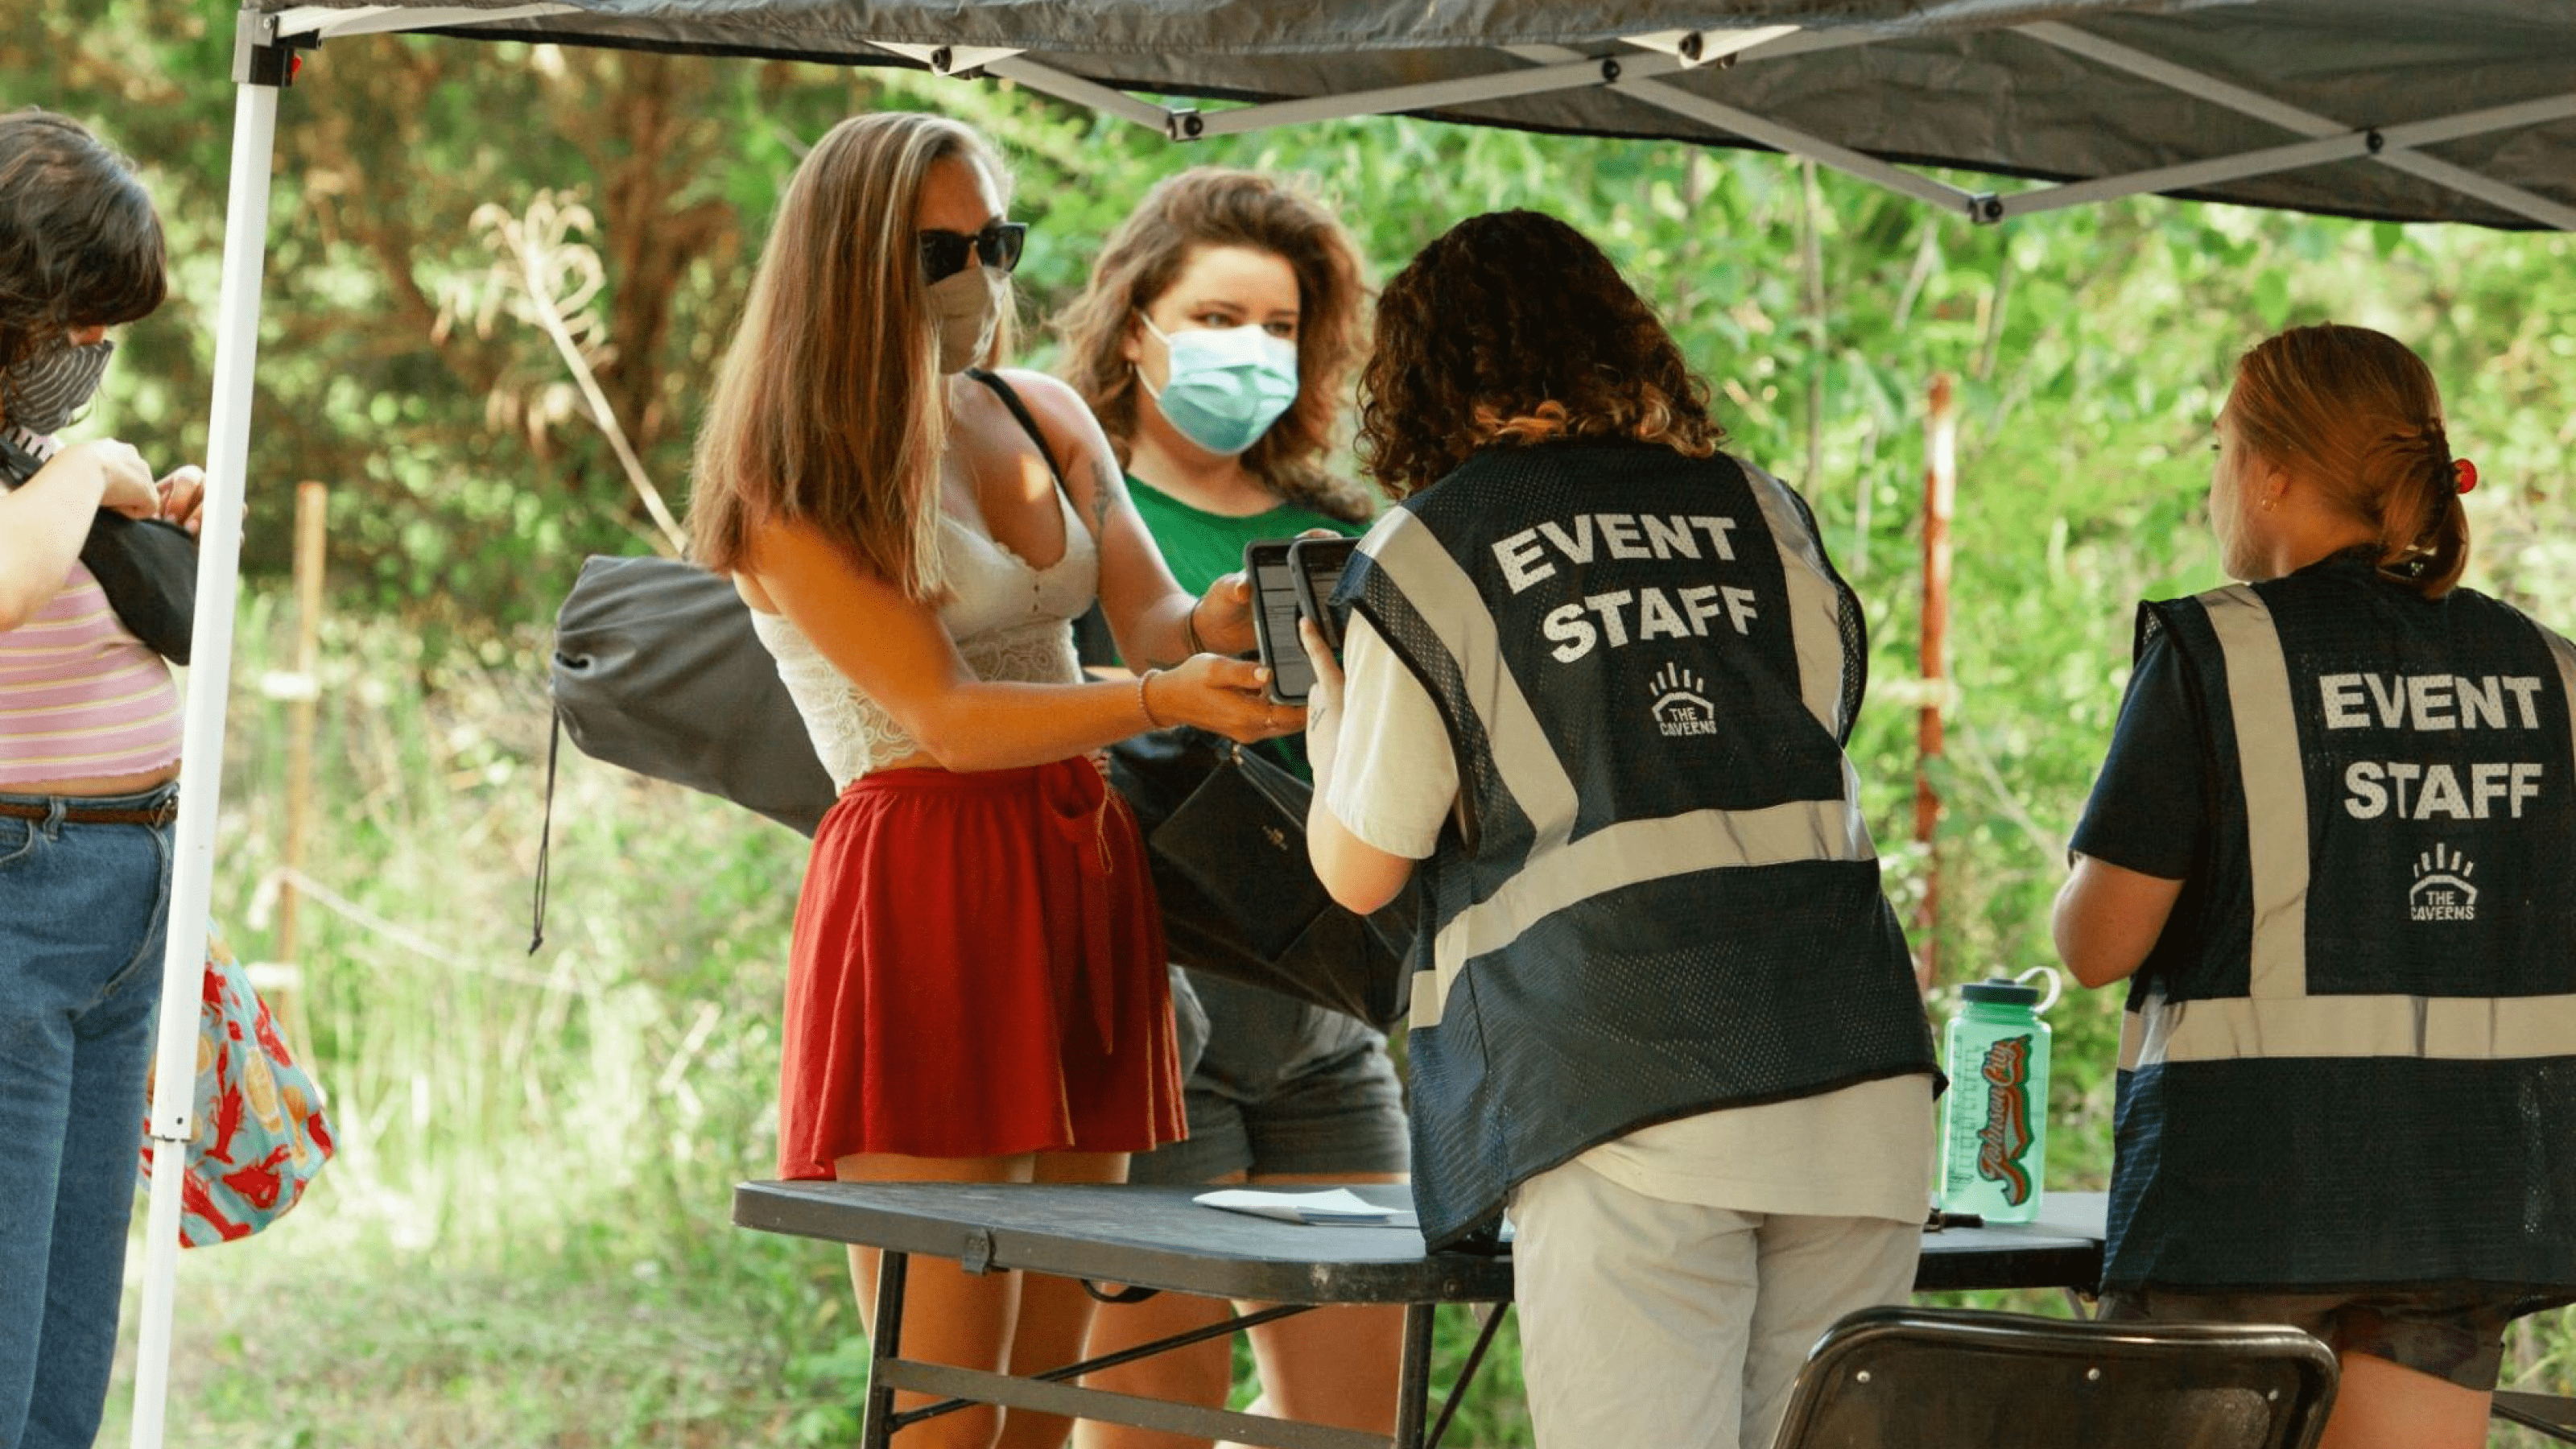 Staff working at an event